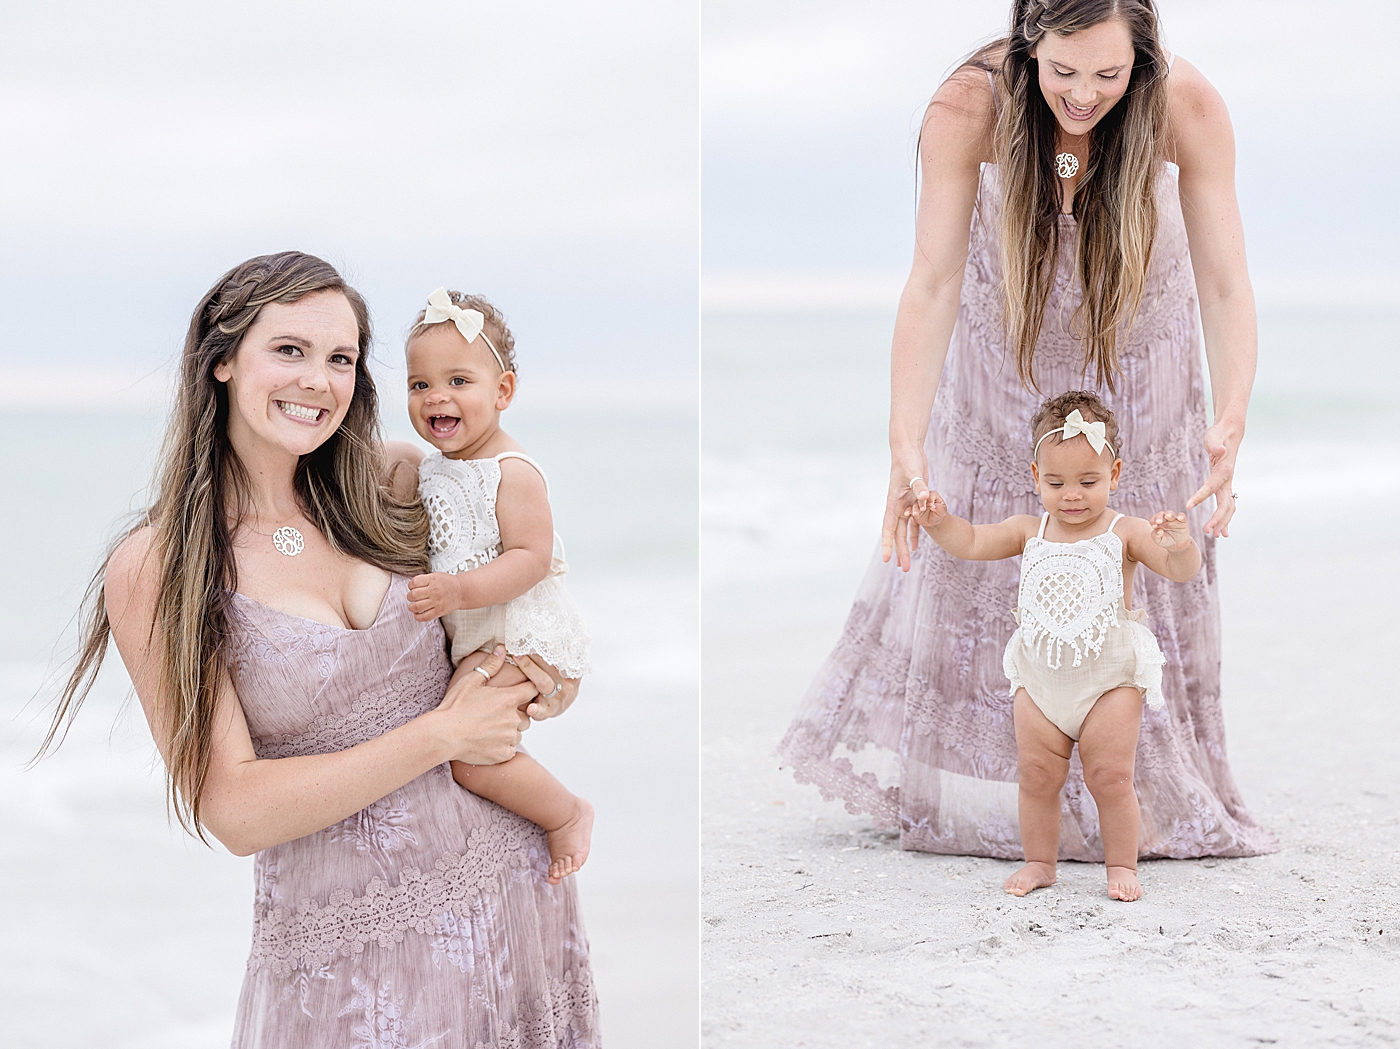 Mom and her baby girl for her first birthday session. Photo by Brittany Elise Photography.